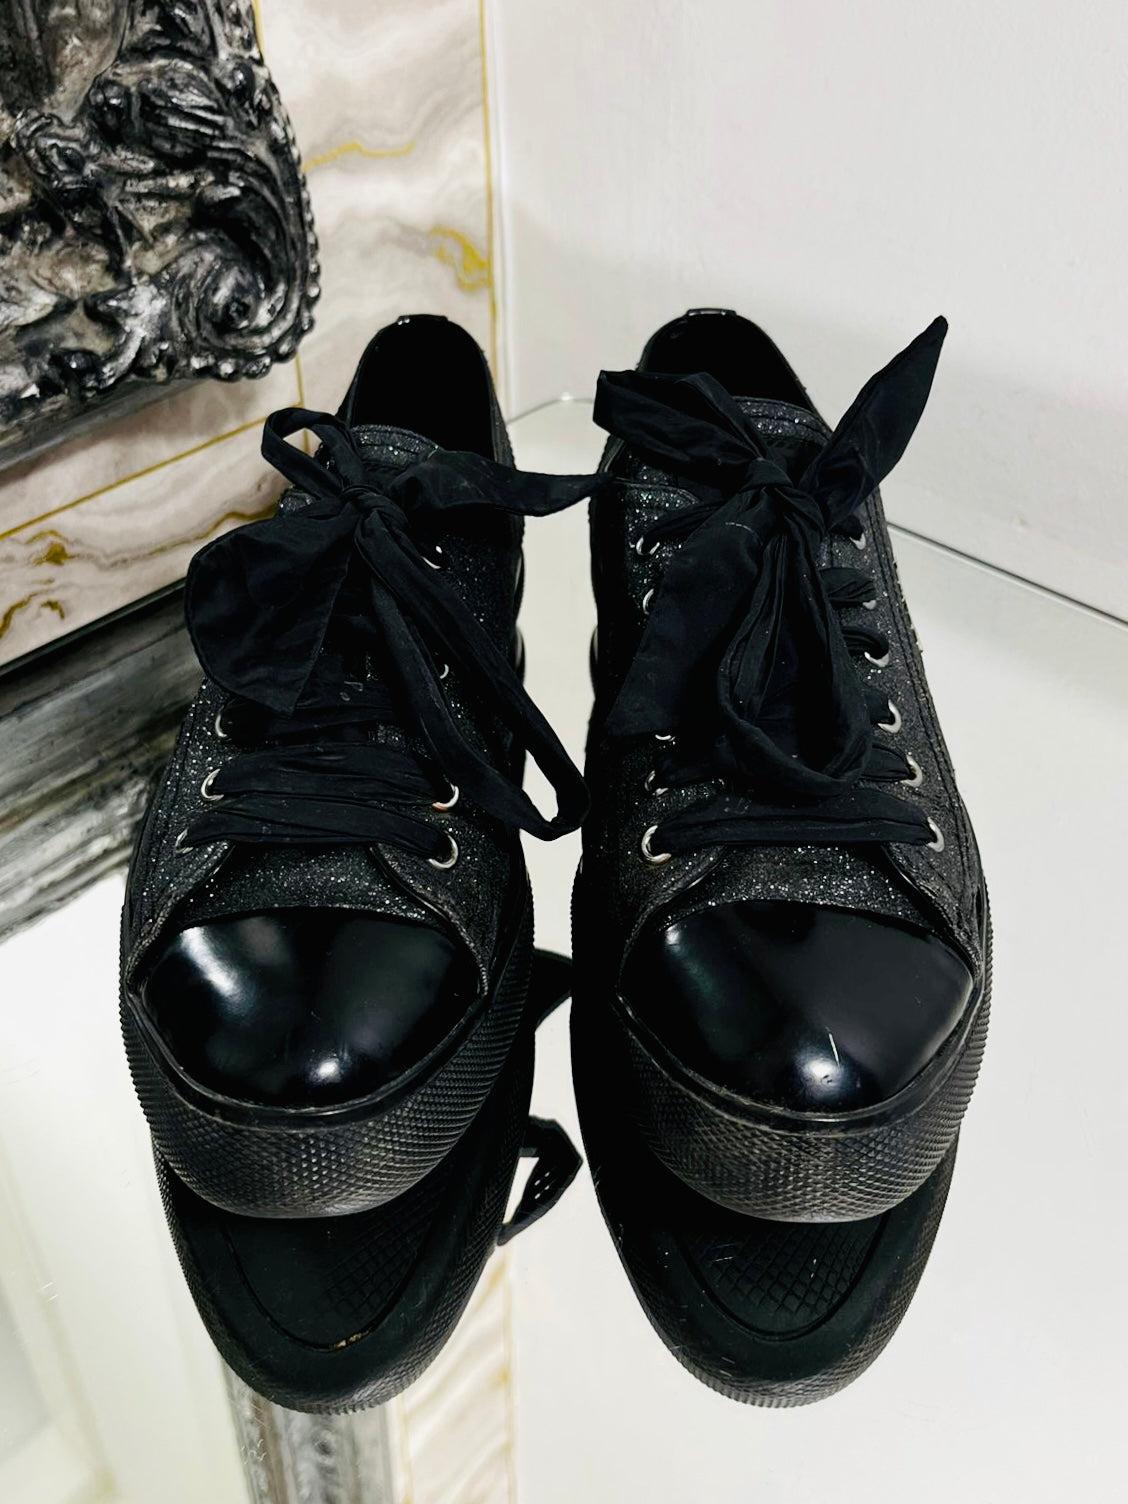 Prada Leather Glitter Sneakers

Black leather with glitter finish through out, with patent leather toe caps and heels.

Silver metal logo to each side and finished with ribbon laces. Rubber logo soles.

Size - 38.5

Condition - Good (A mark to one